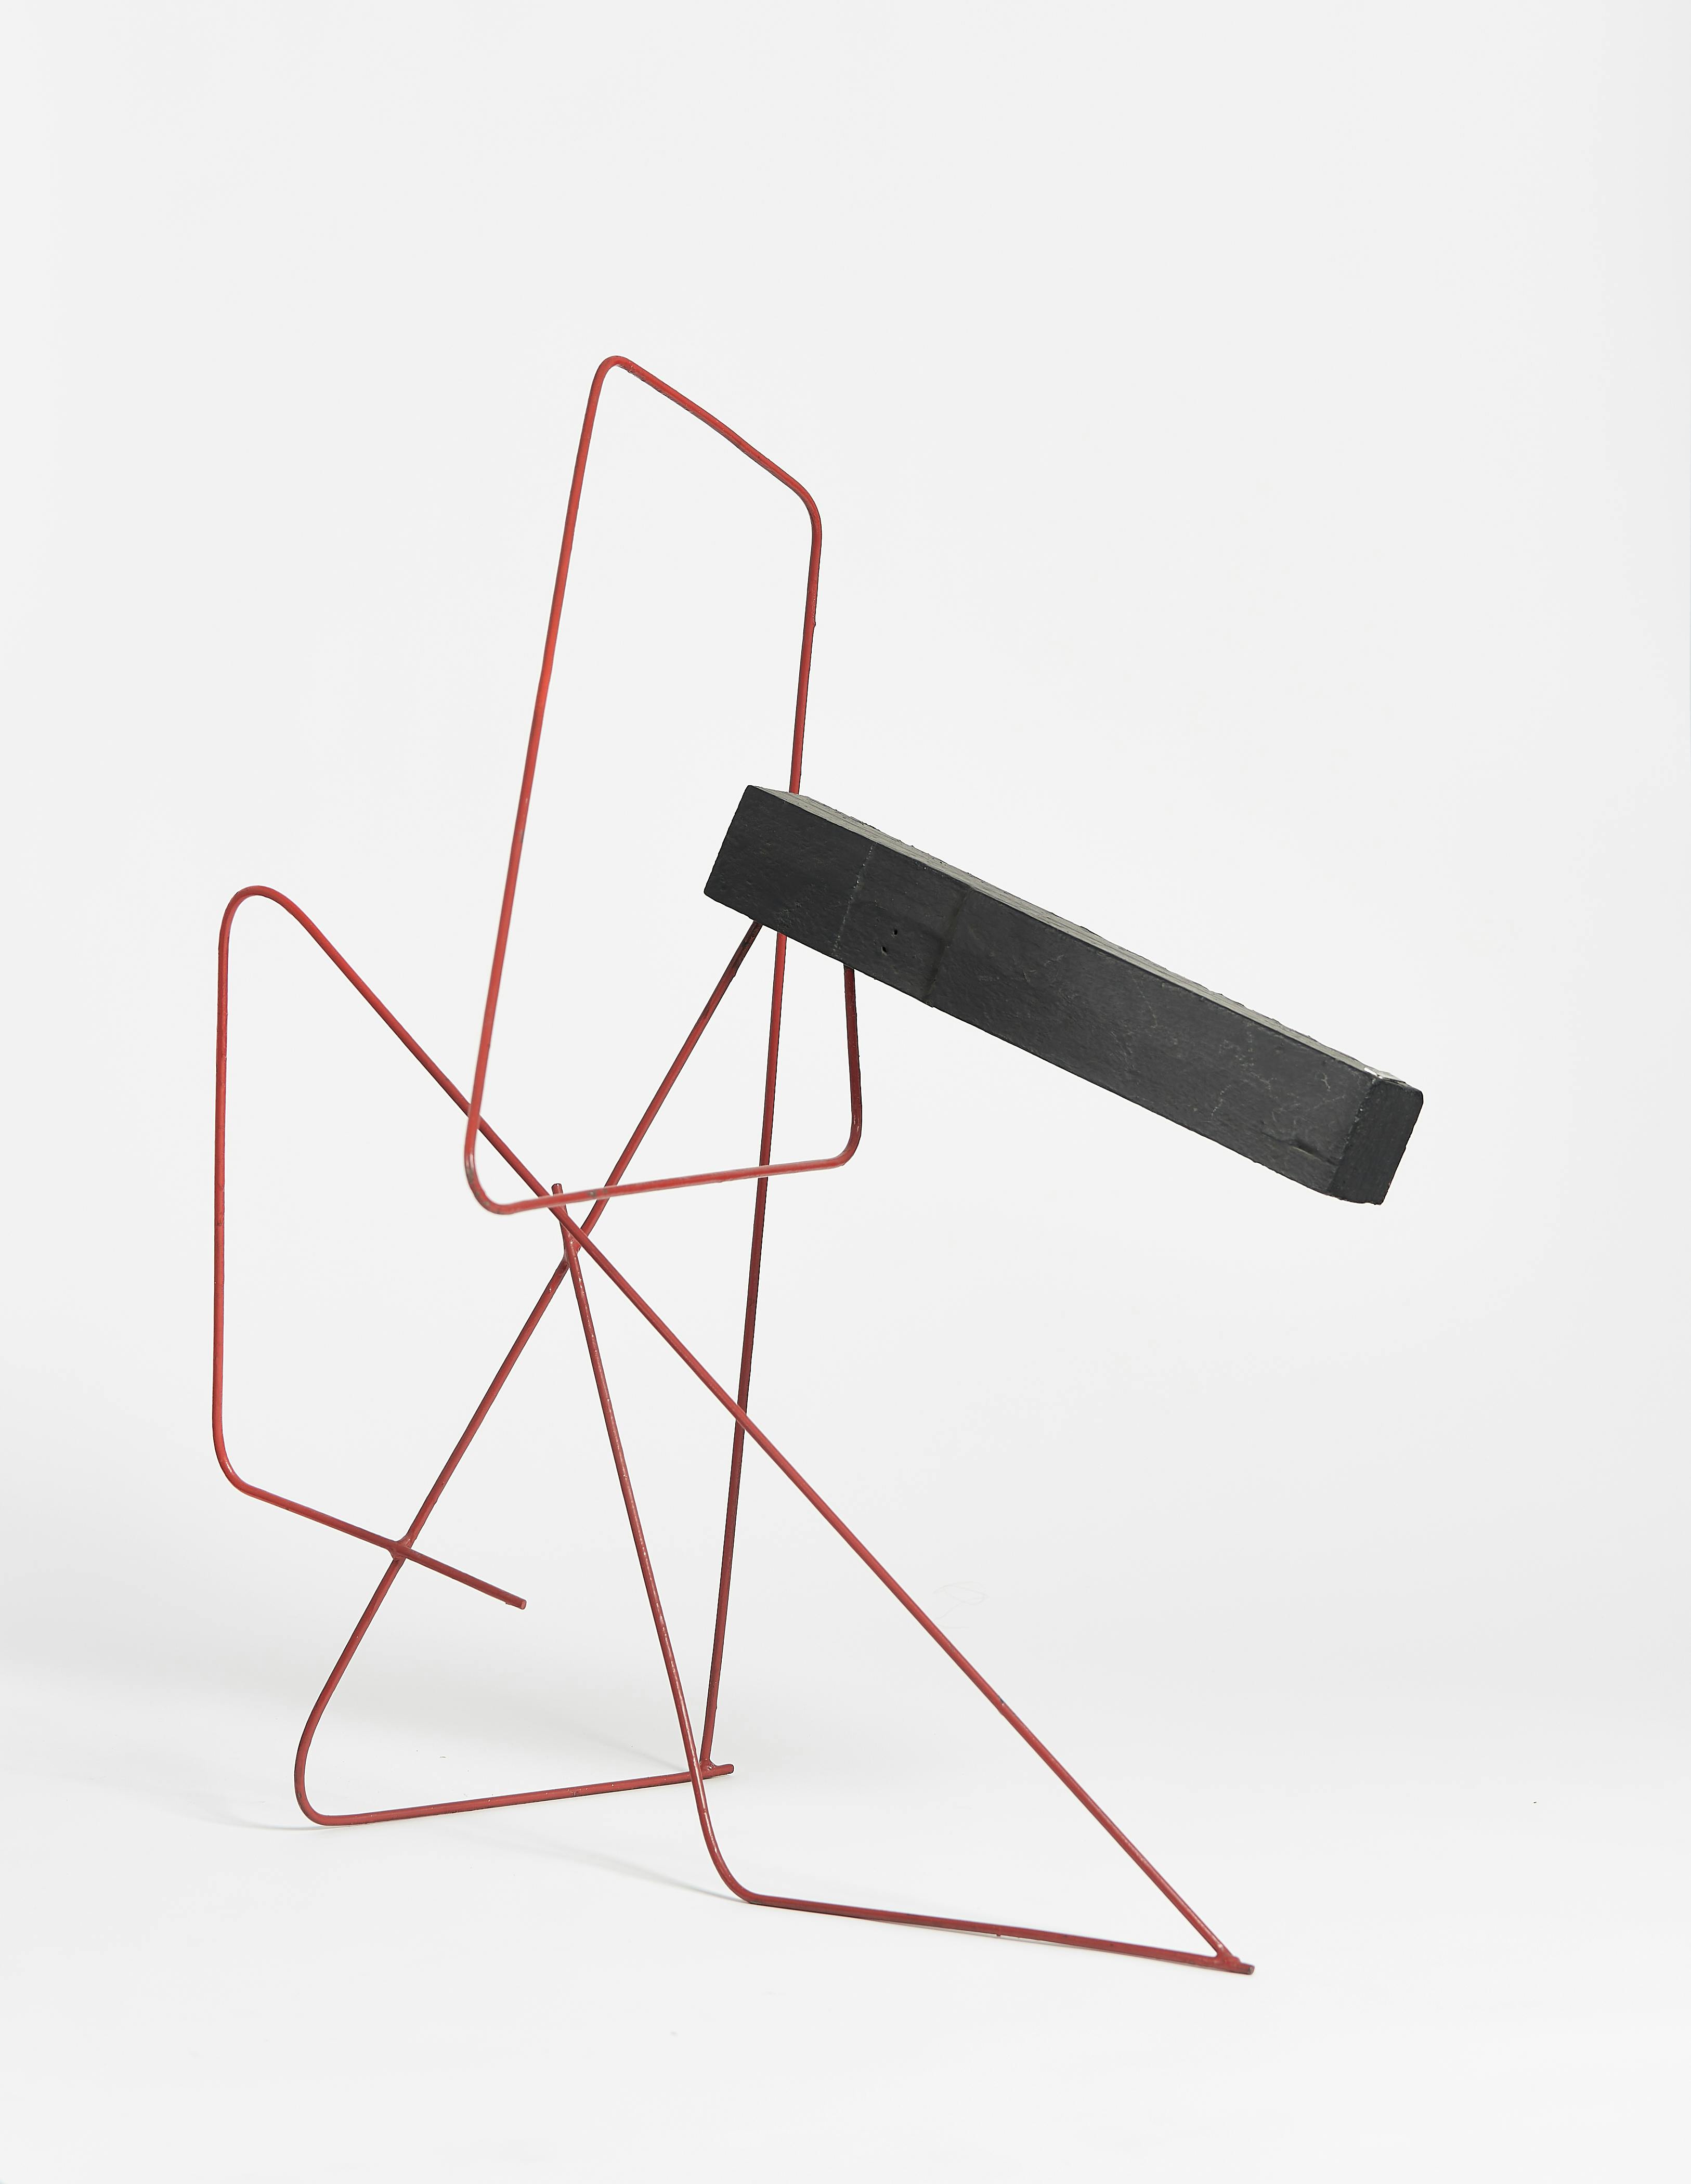 Image of abstract, free-standing sculpture by Enio Iommi.